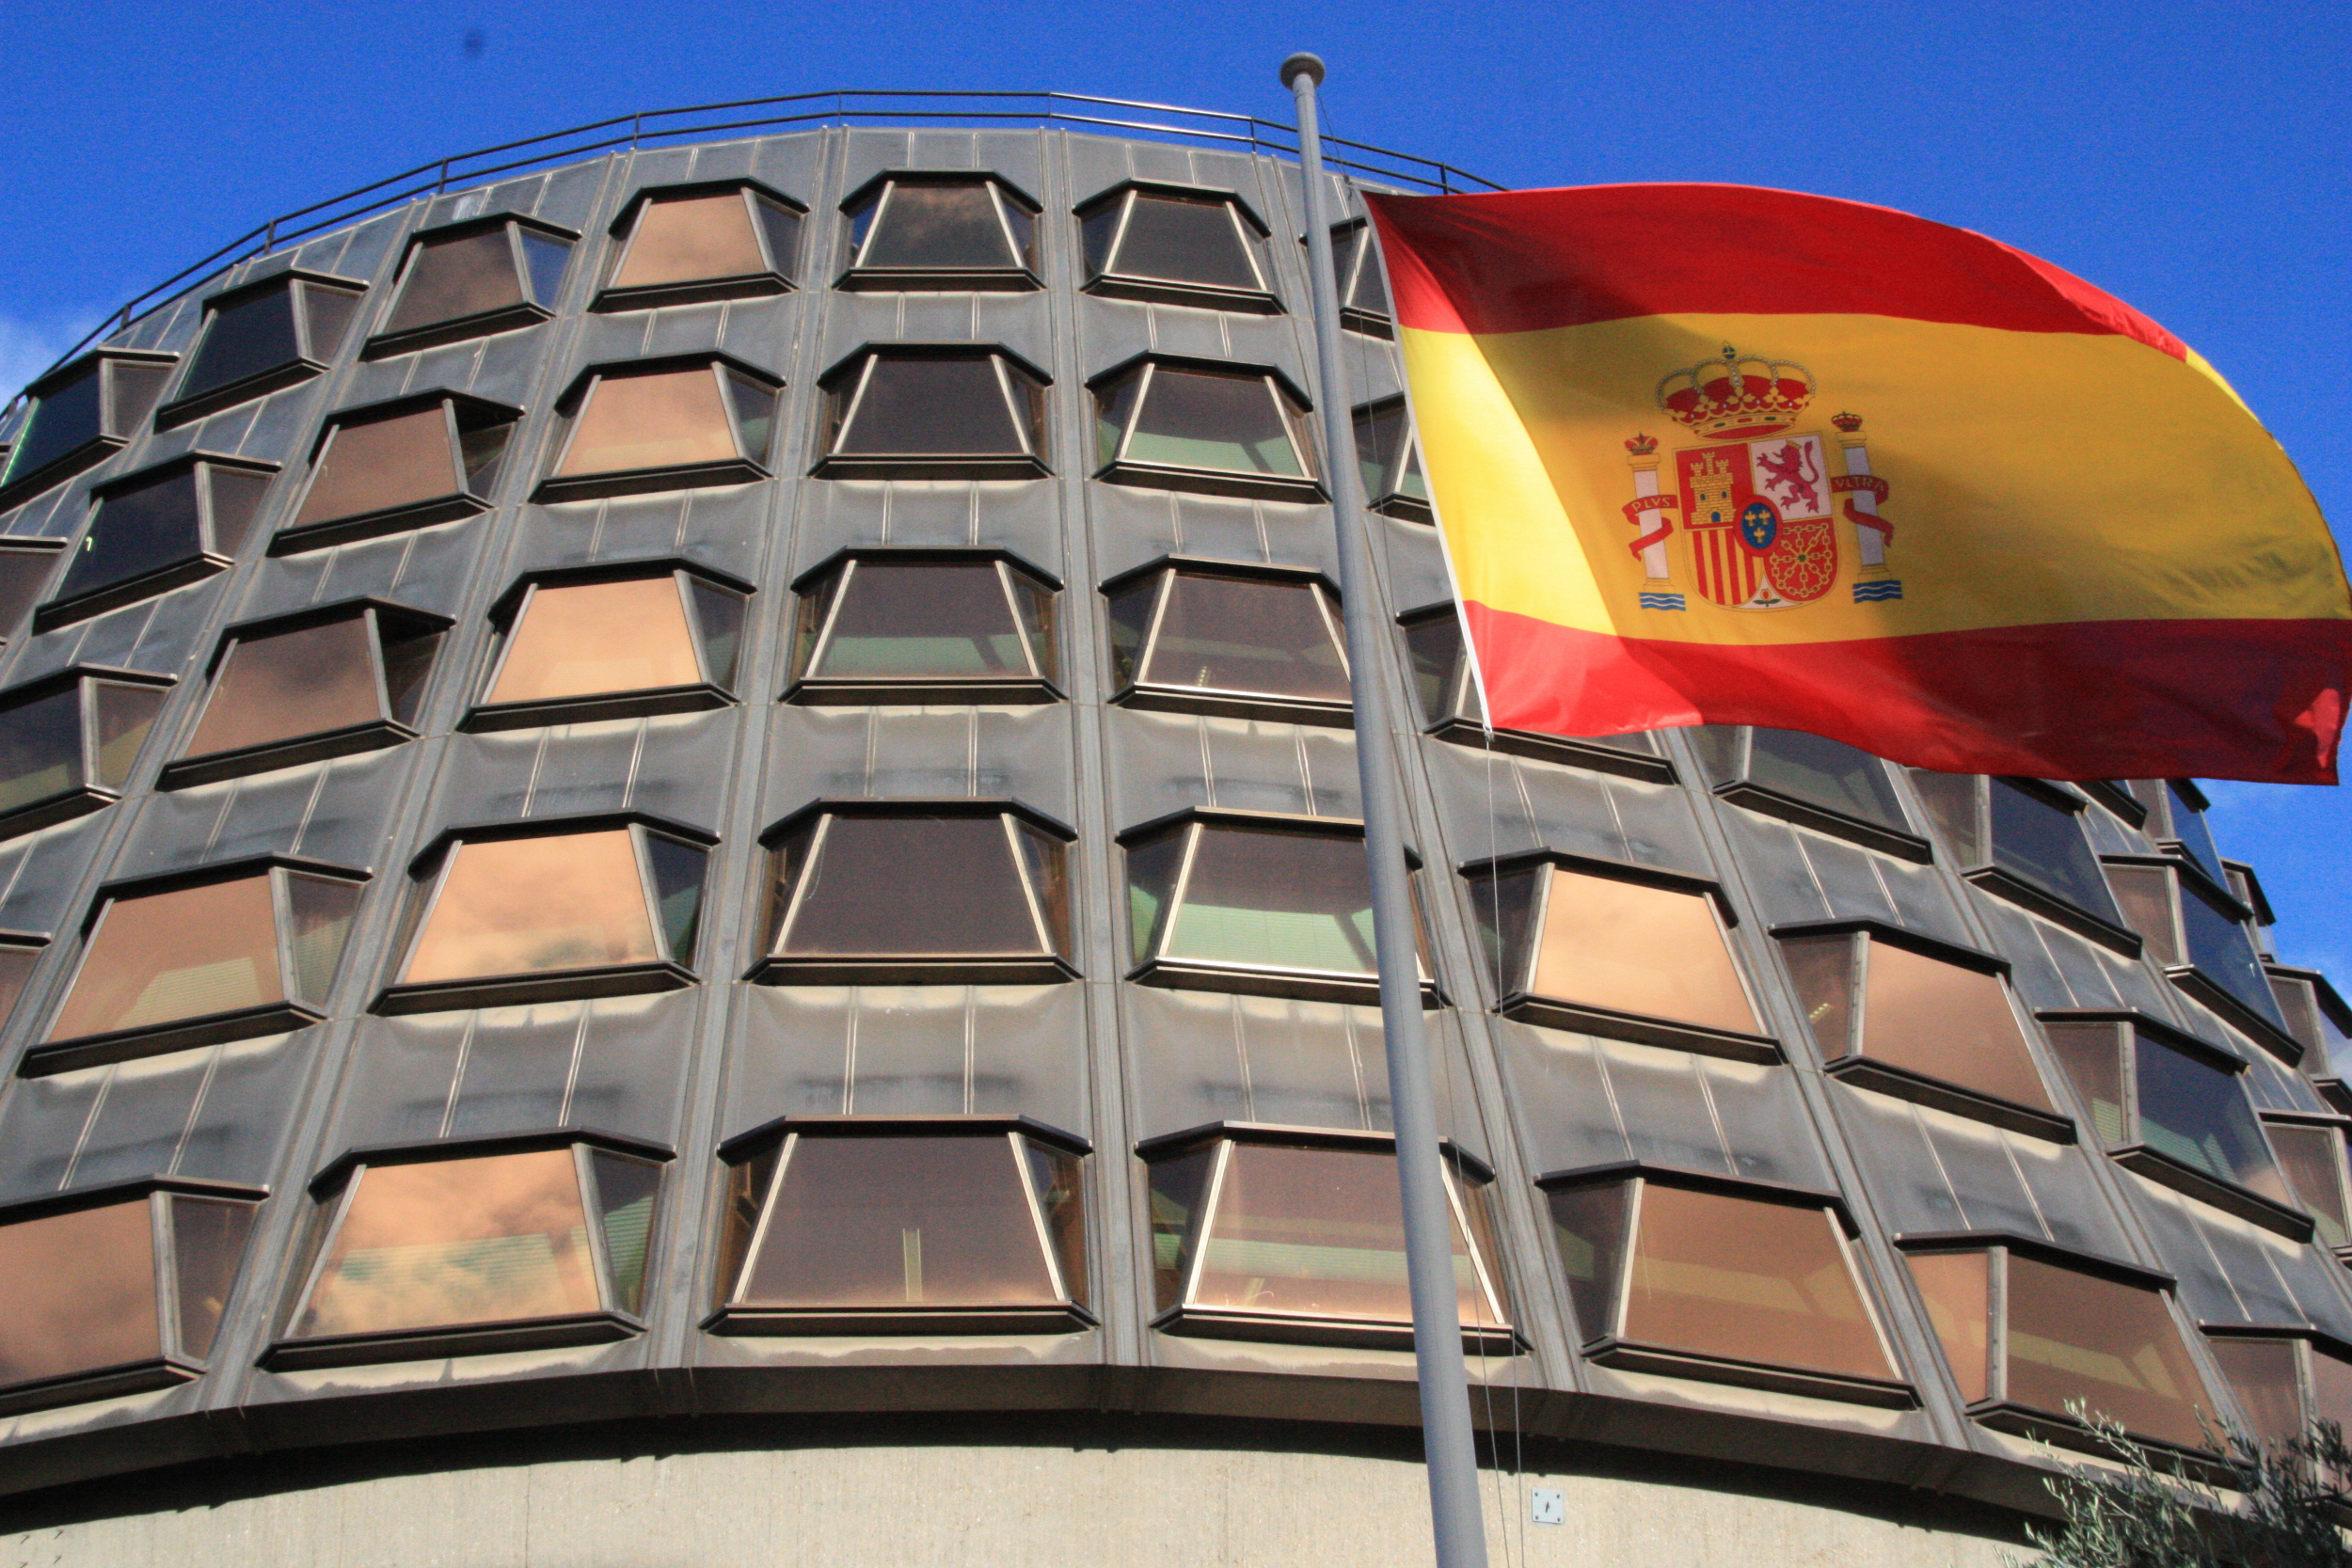 Spanish Constitutional Court (TC)'s building in Madrid (by ACN)